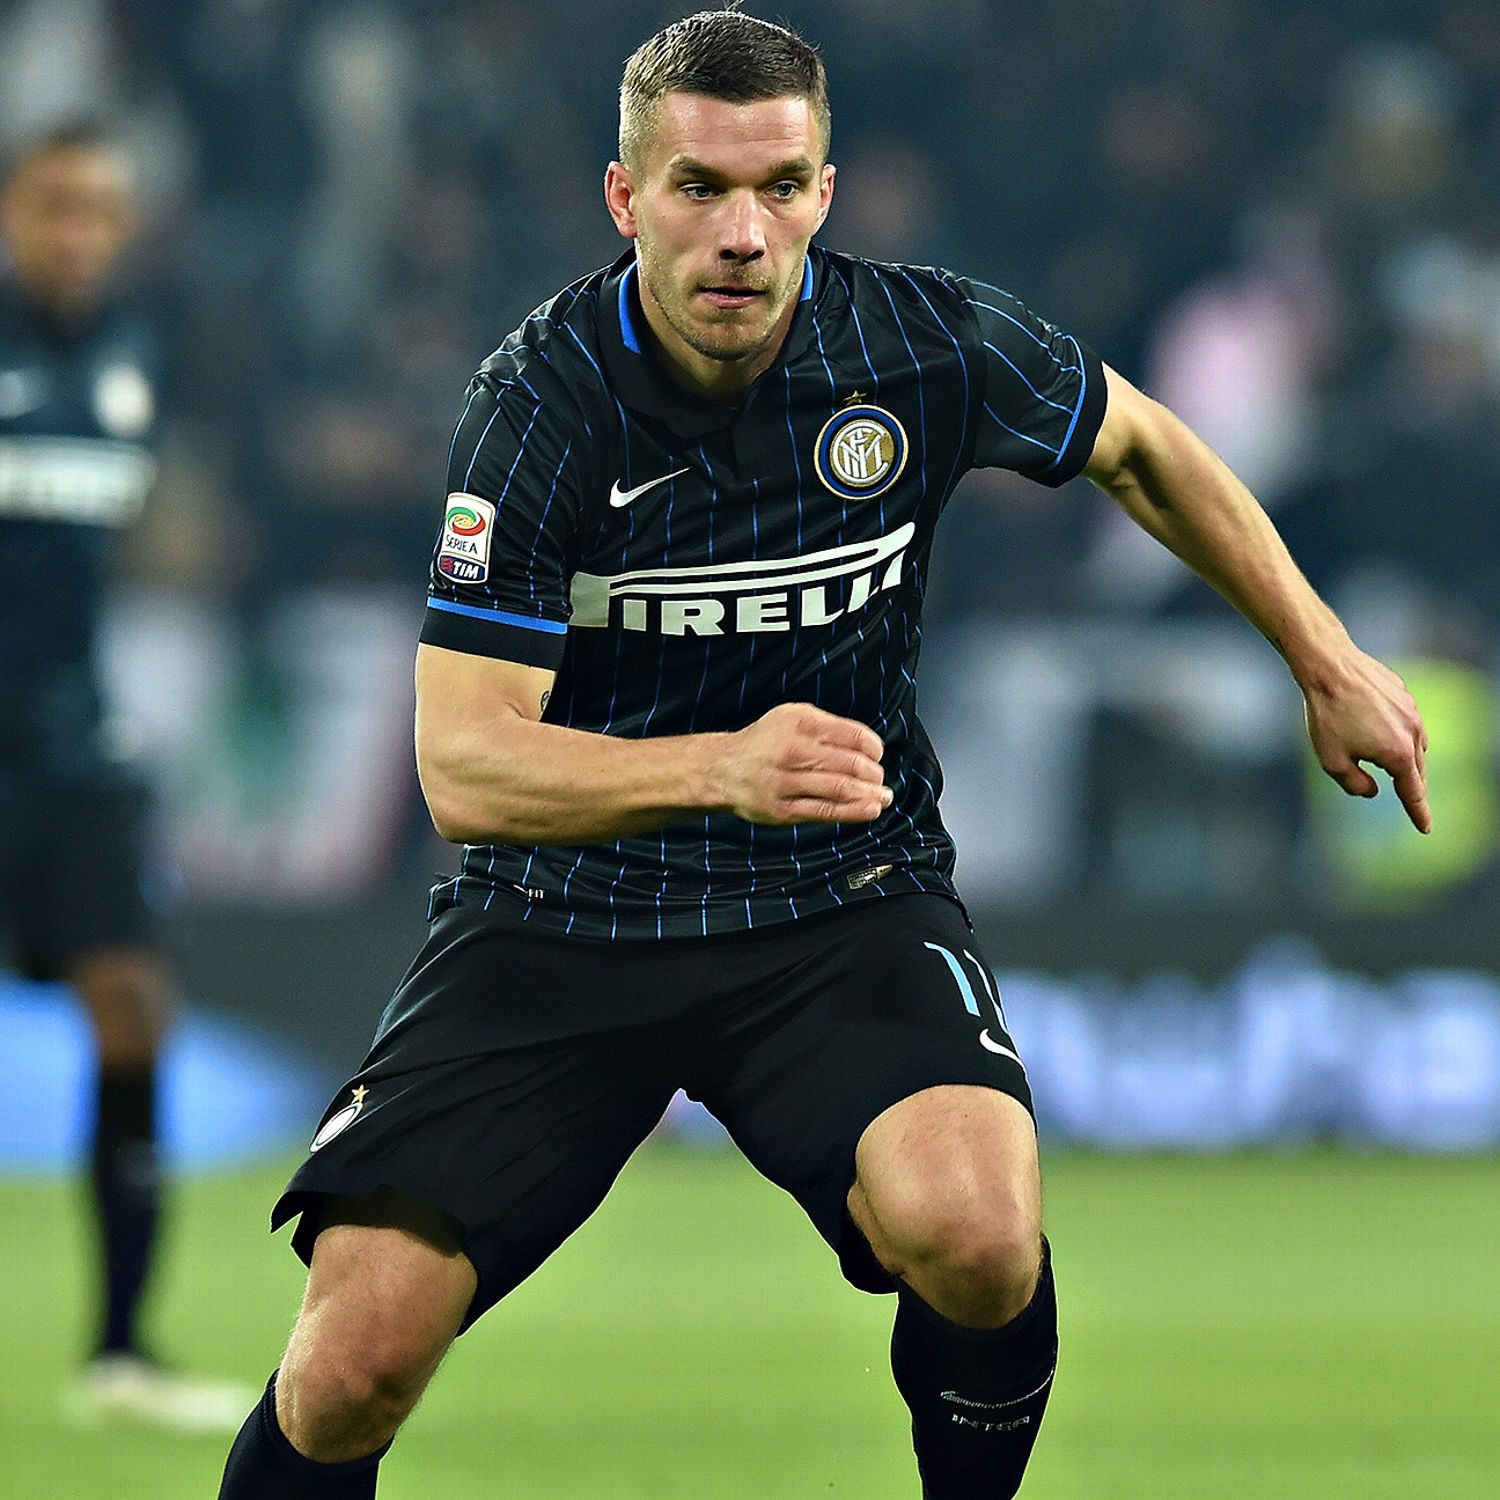 Podolski: “I can’t wait to play in front of the Inter fans”